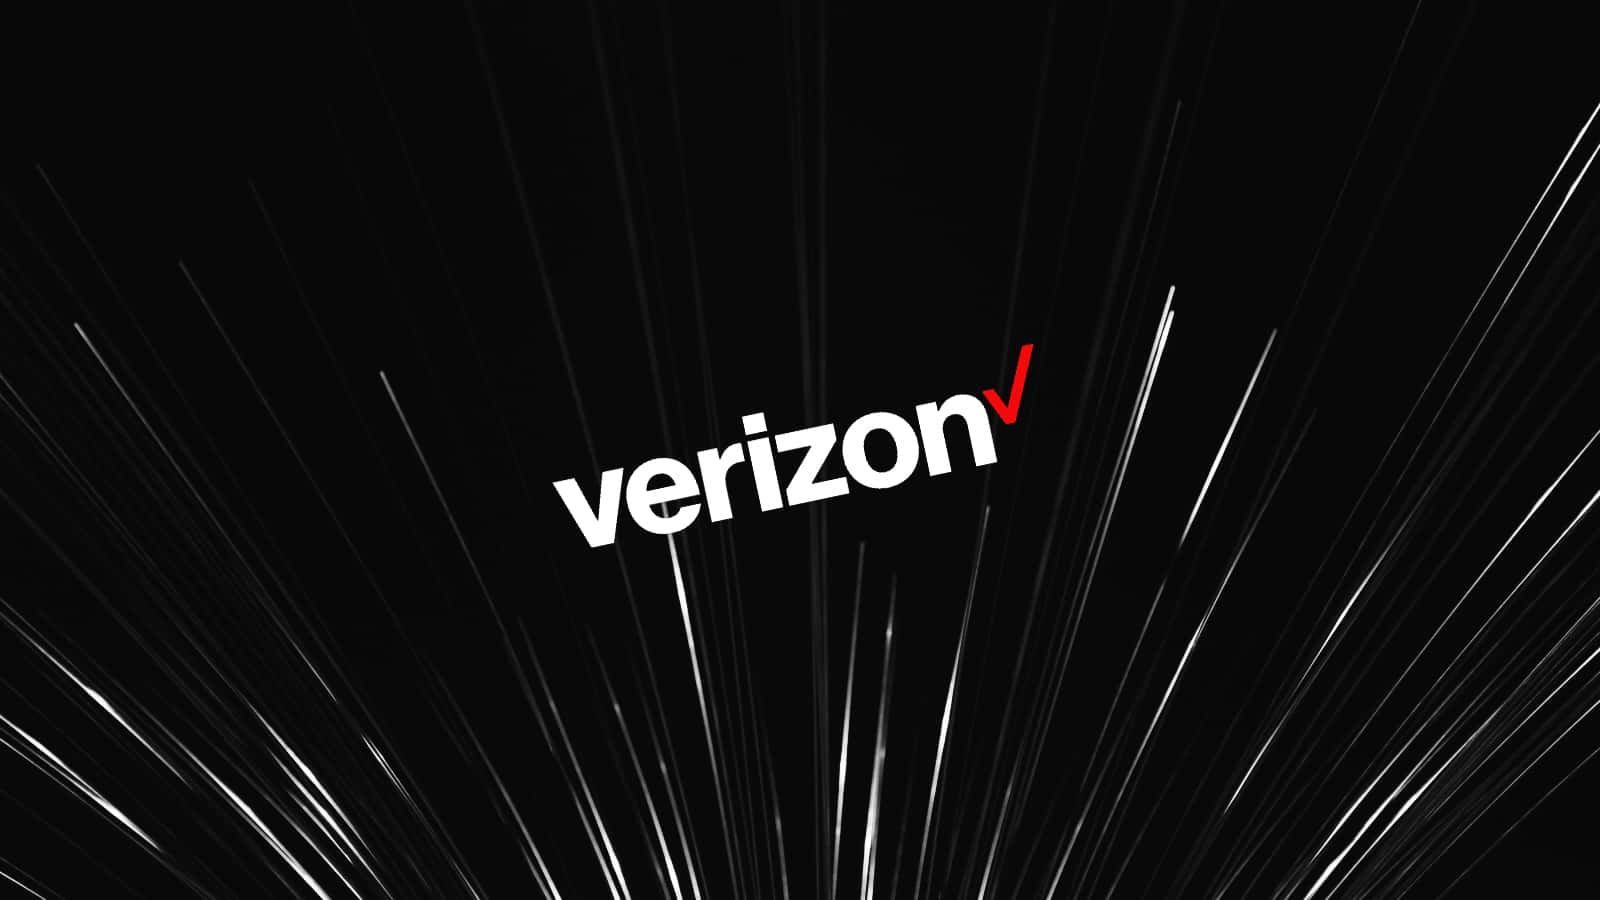 Verizon is the Future of Connectivity